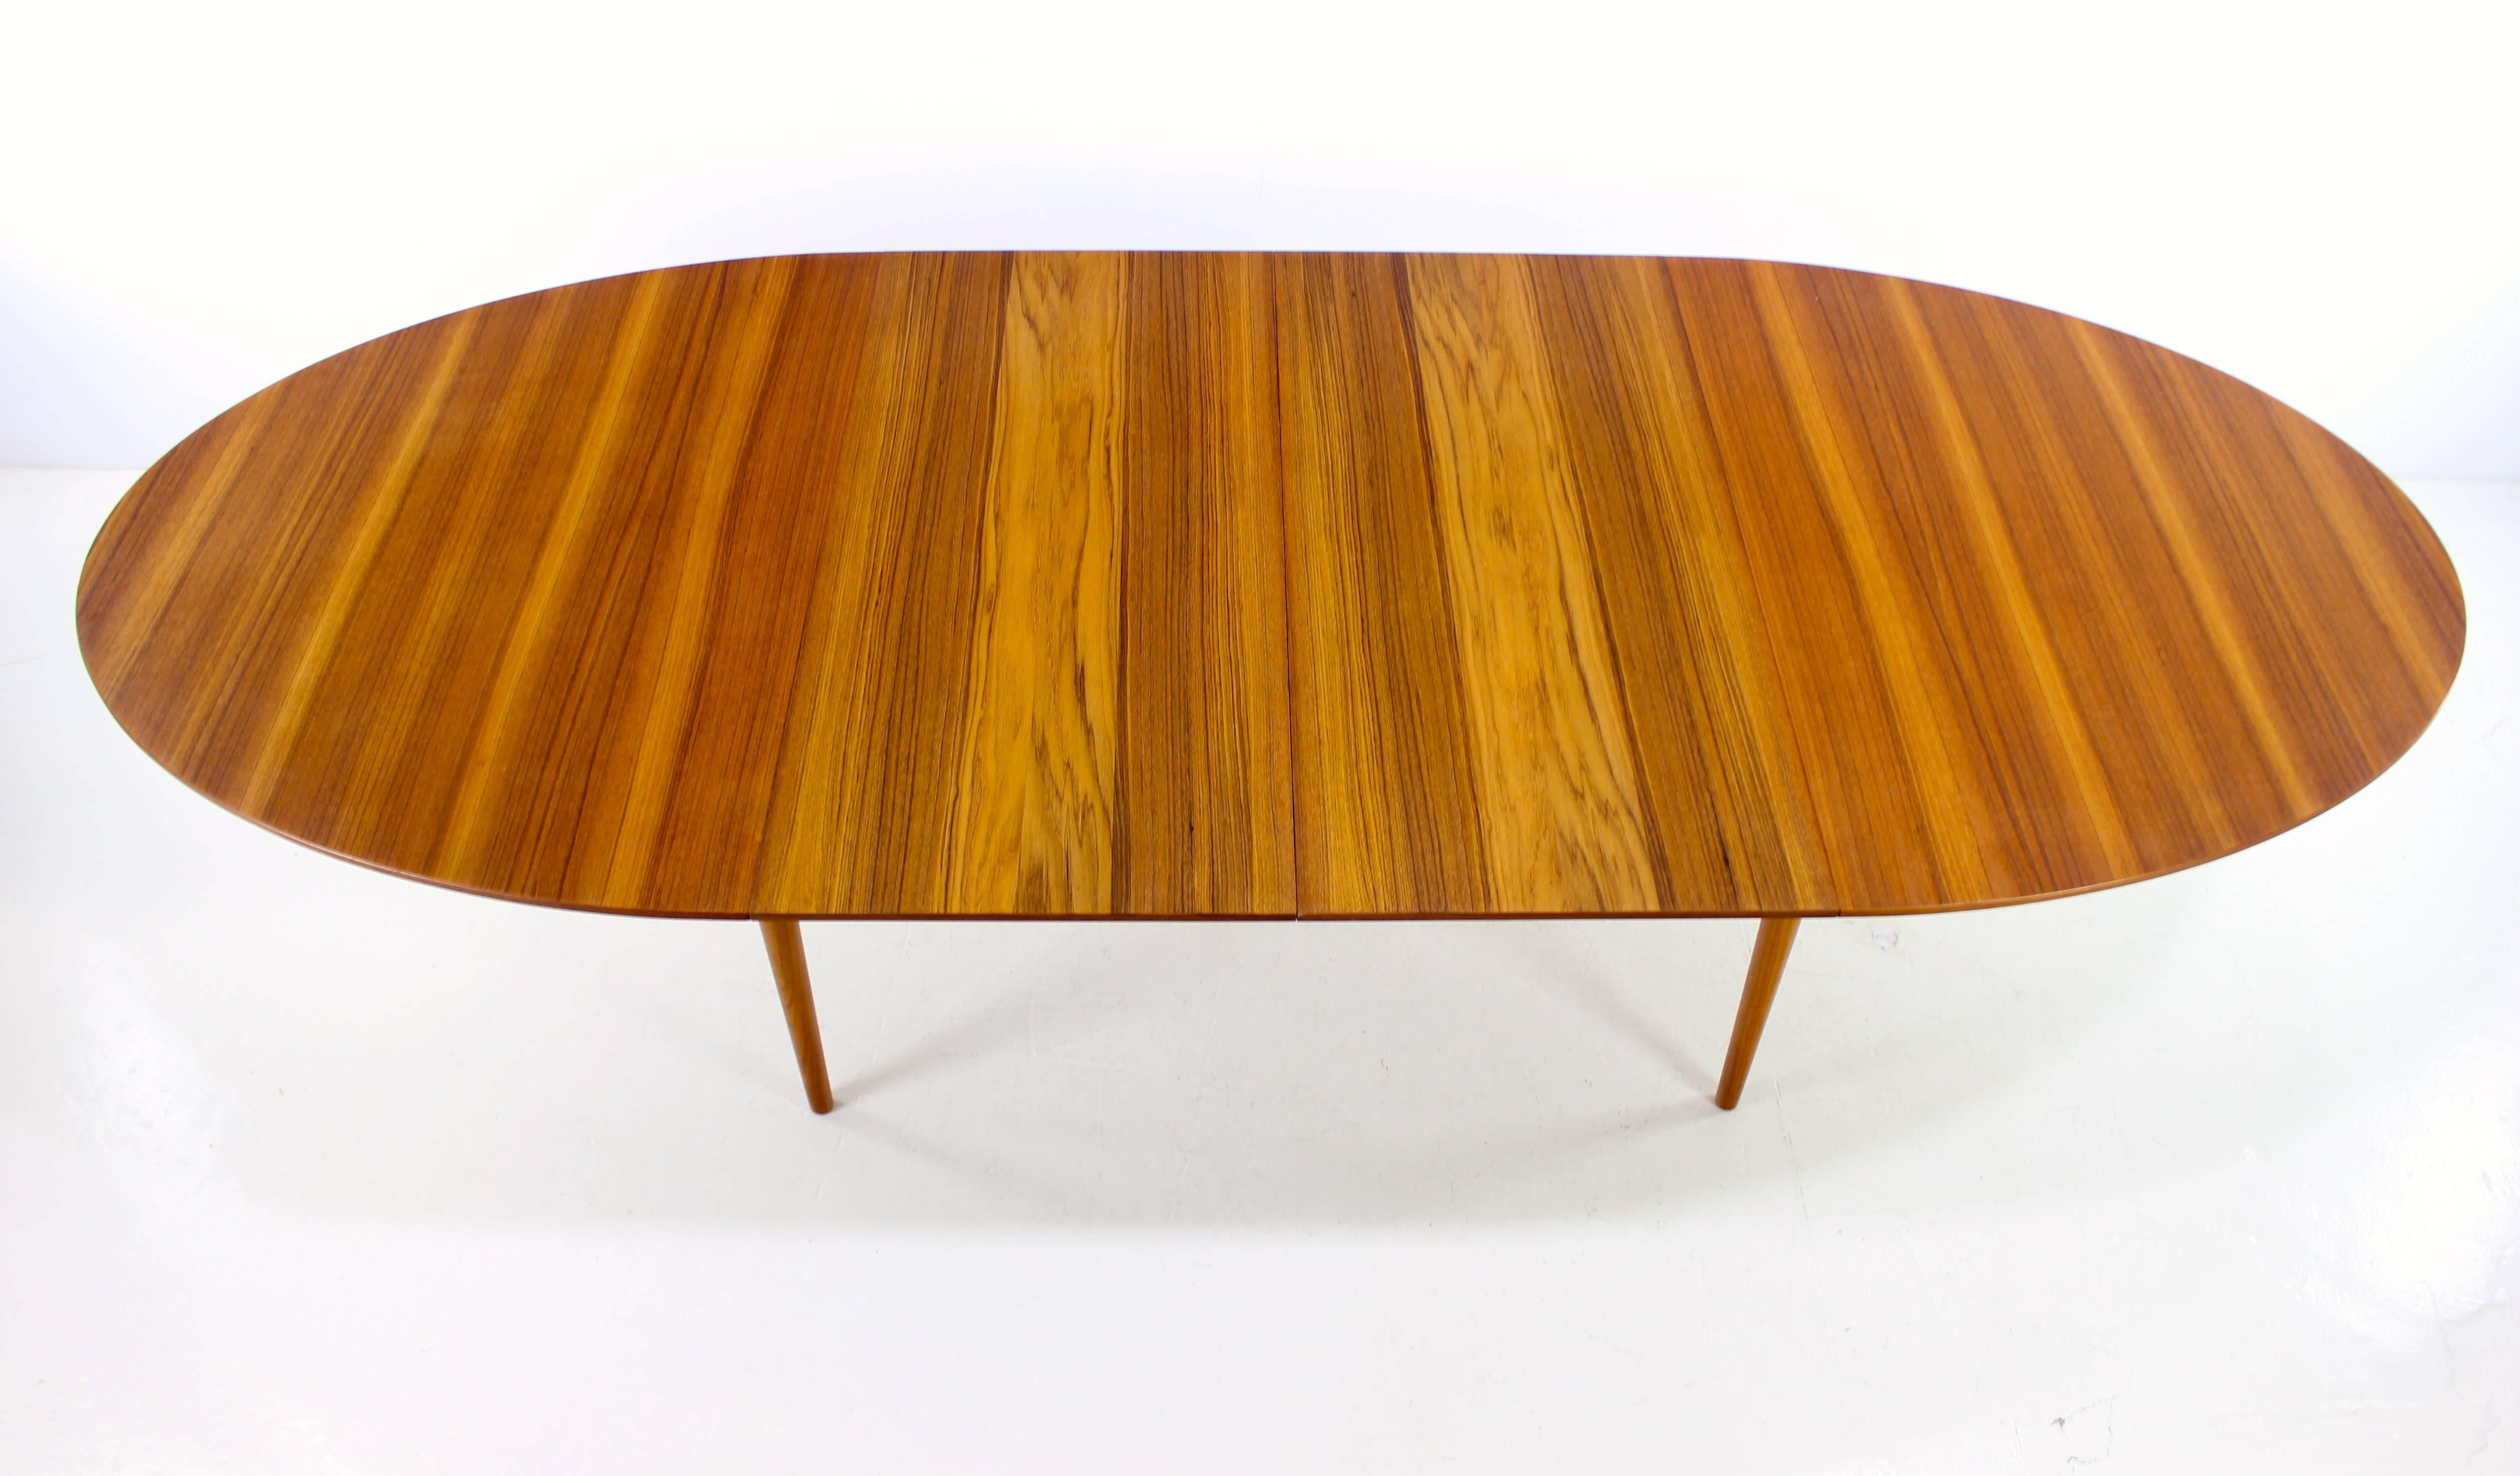 "Judas" dining table designed by Finn Juhl.
Niels Vodder, maker.
Richly grained teak with inset sculptural skirt and legs. Silver inlays in tabletop.
Two leaves, measuring 21.5" each provide full extension of